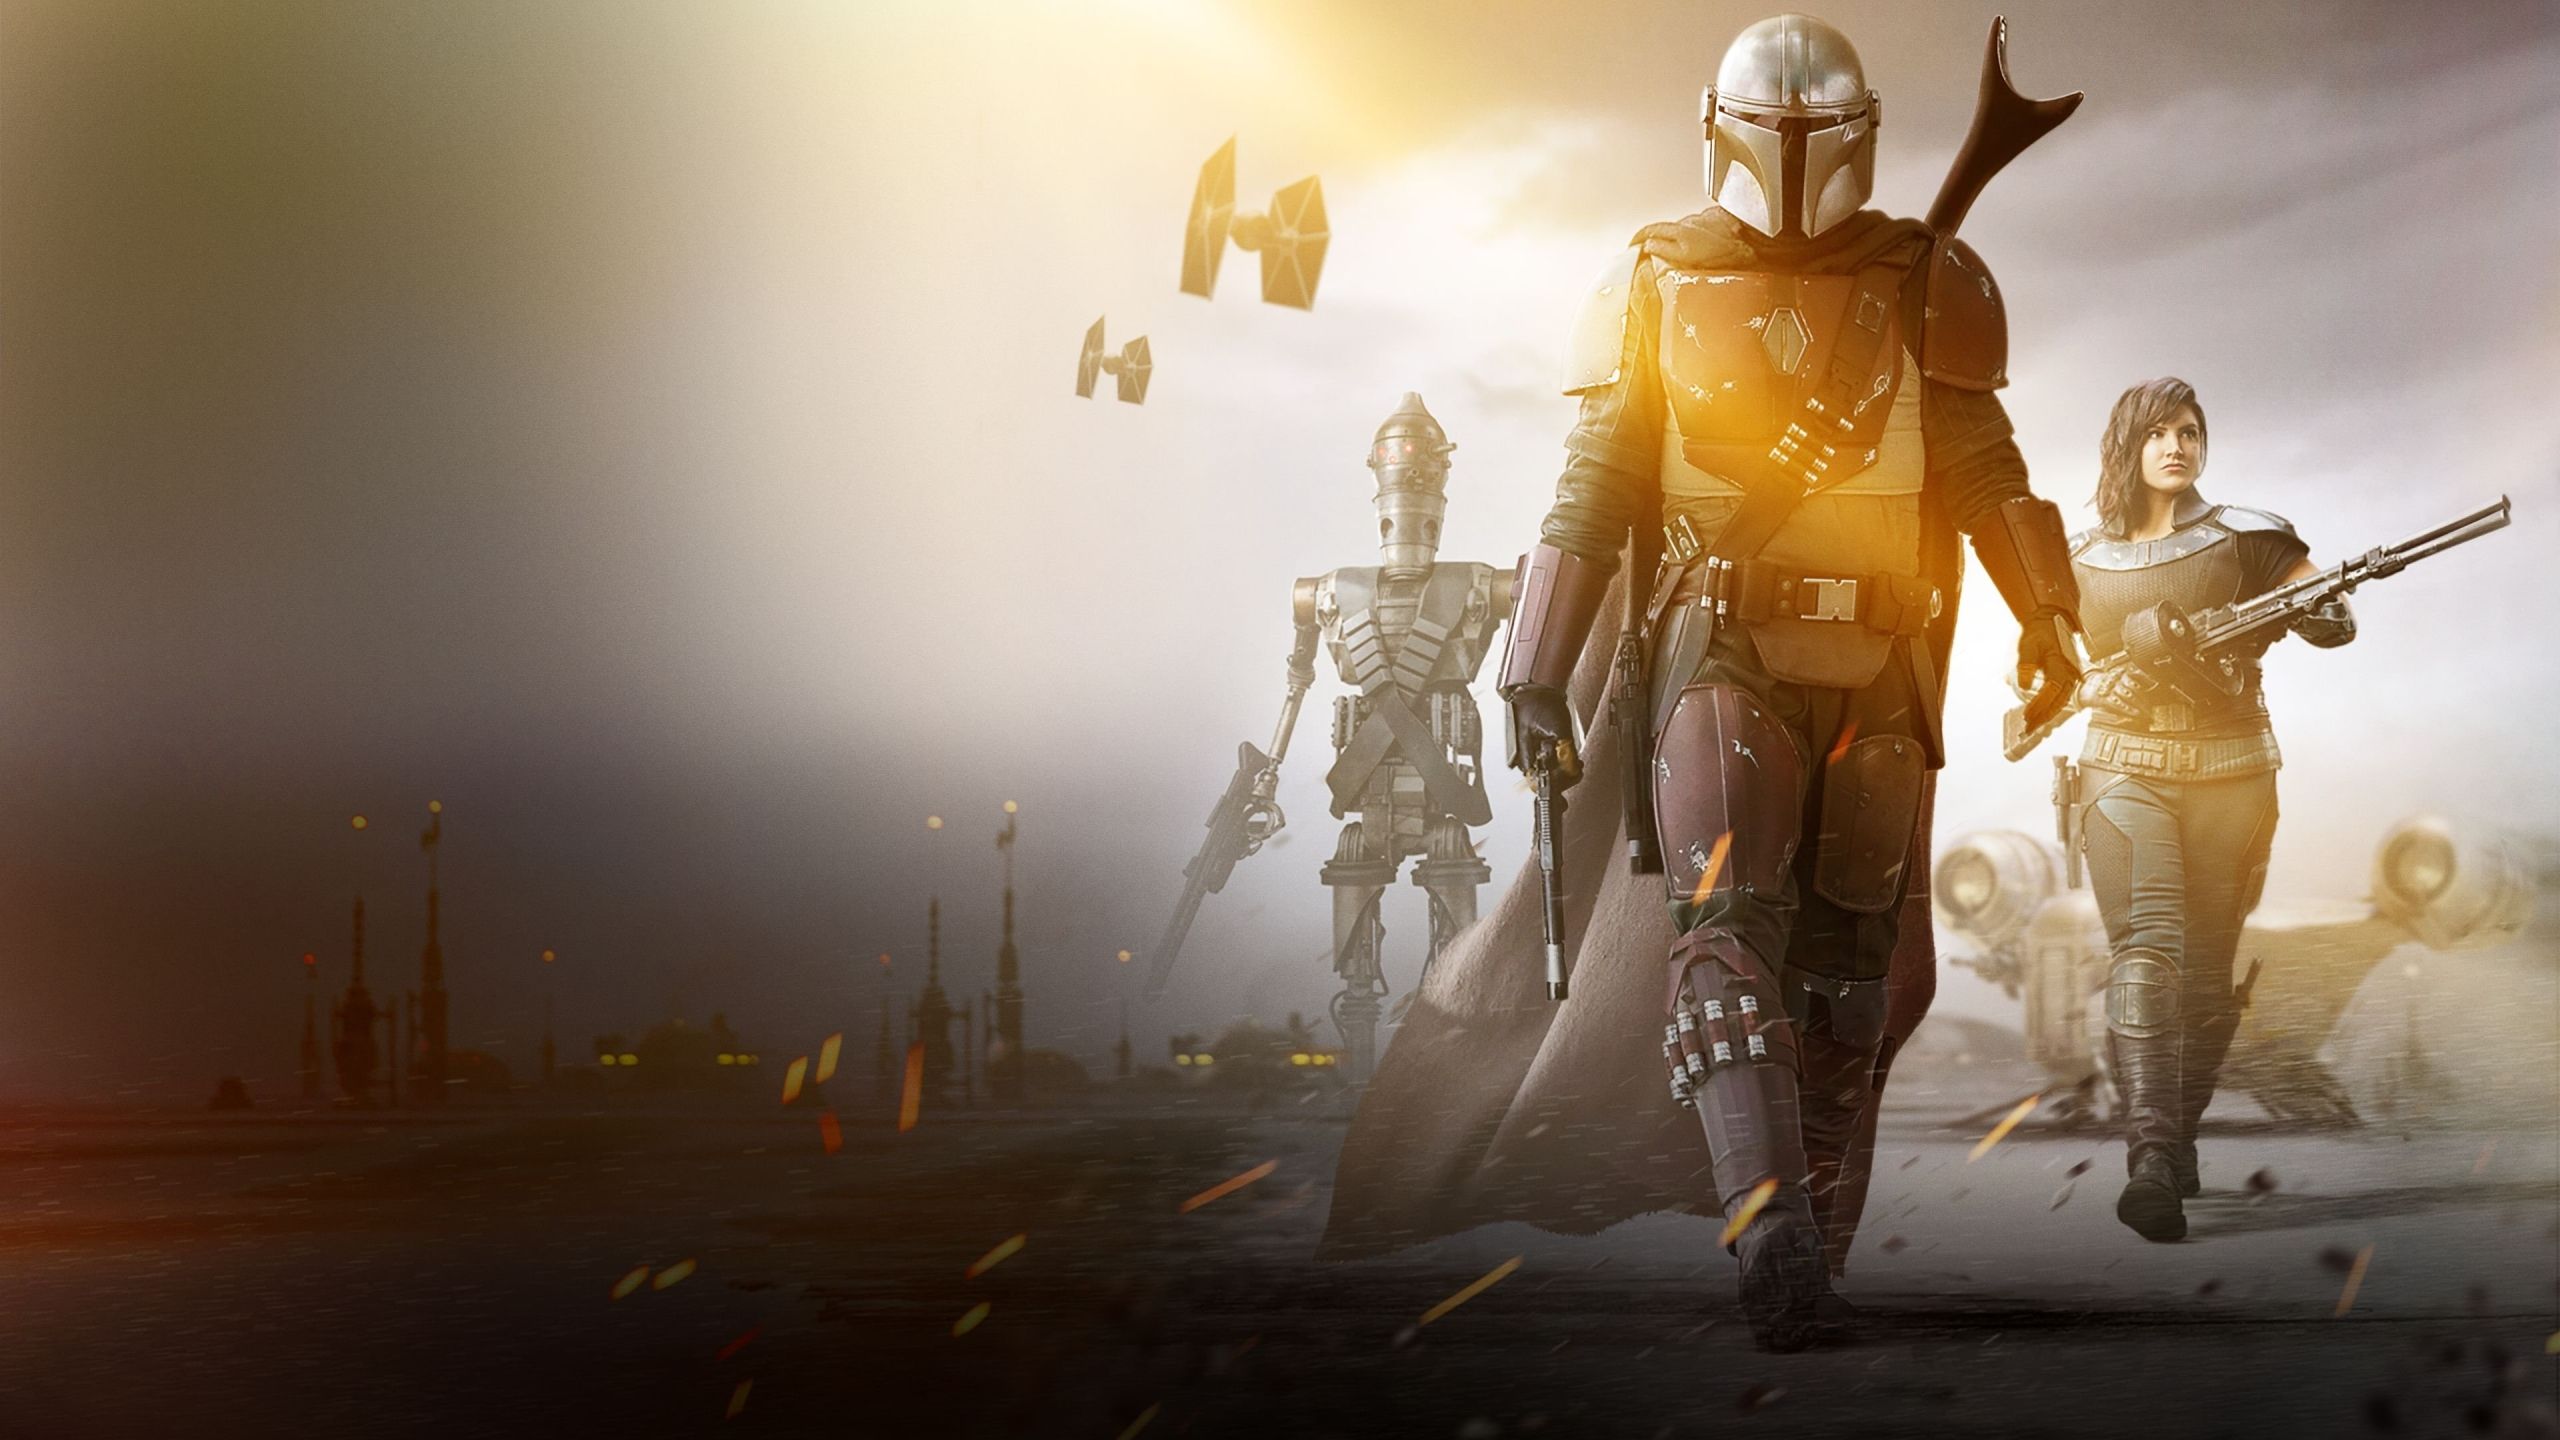 2560x1440 The Mandalorian 2019 1440P Resolution Wallpaper, HD TV Series 4K Wallpapers, Image, Photos and Backgrounds